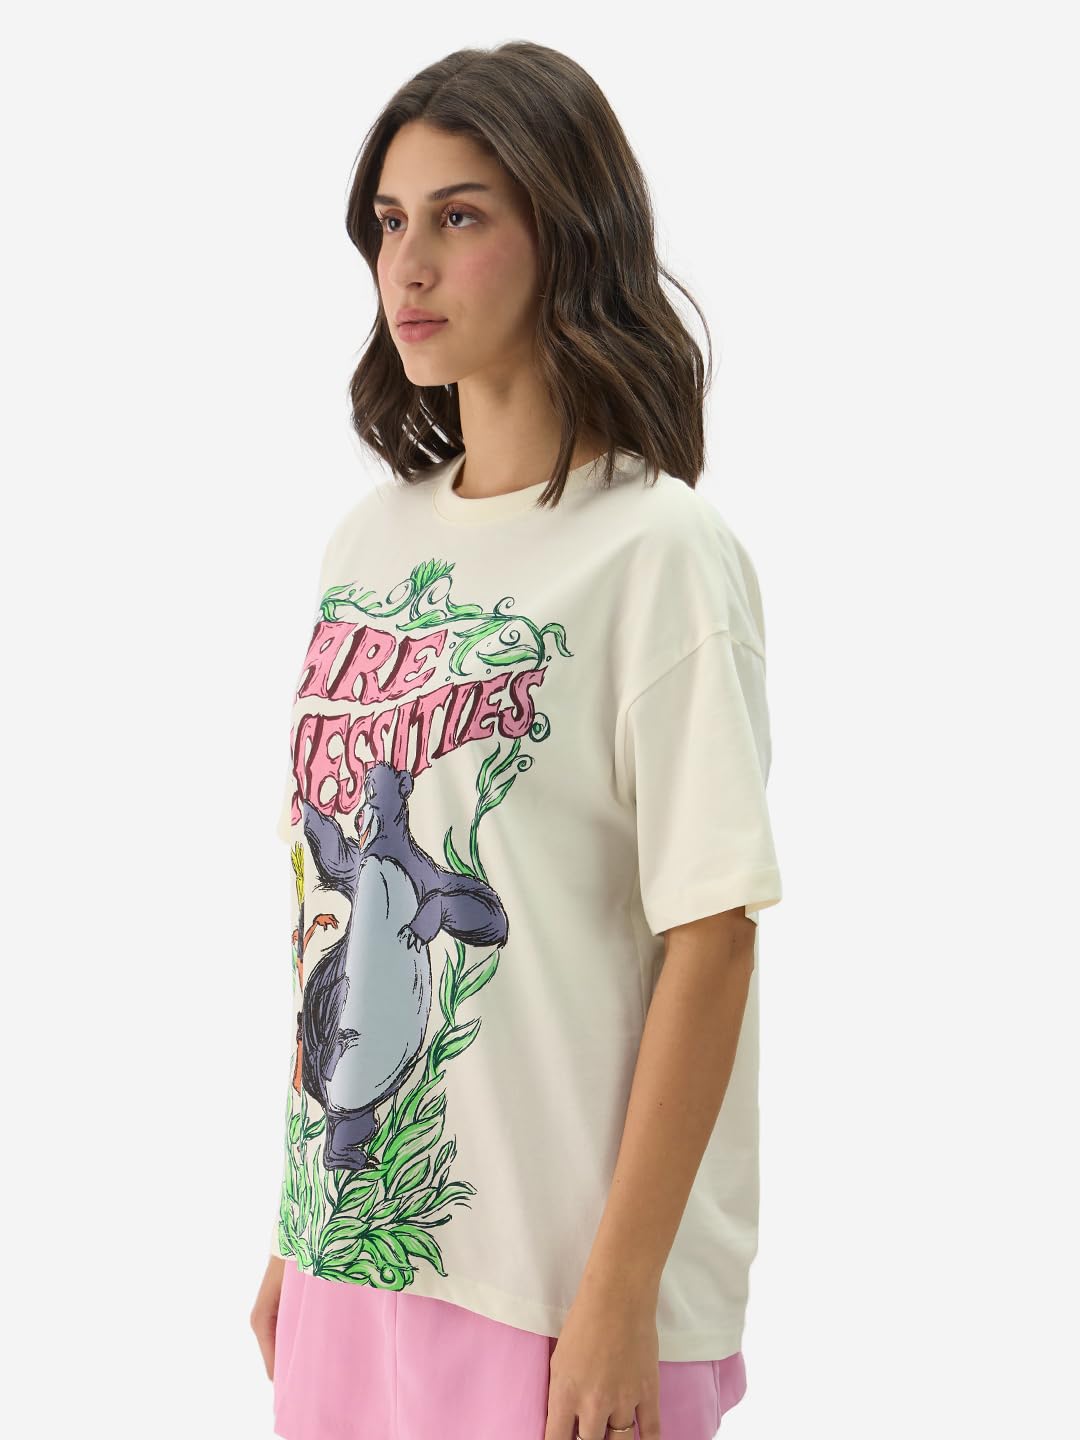 The Souled Store Official Disney: Bare Necessities Women and Girls Short Sleeve Round Neck White Graphic Print Cotton Oversized Fit T-Shirts Disney Old Retro Cartoon 90s Animated Character Themed